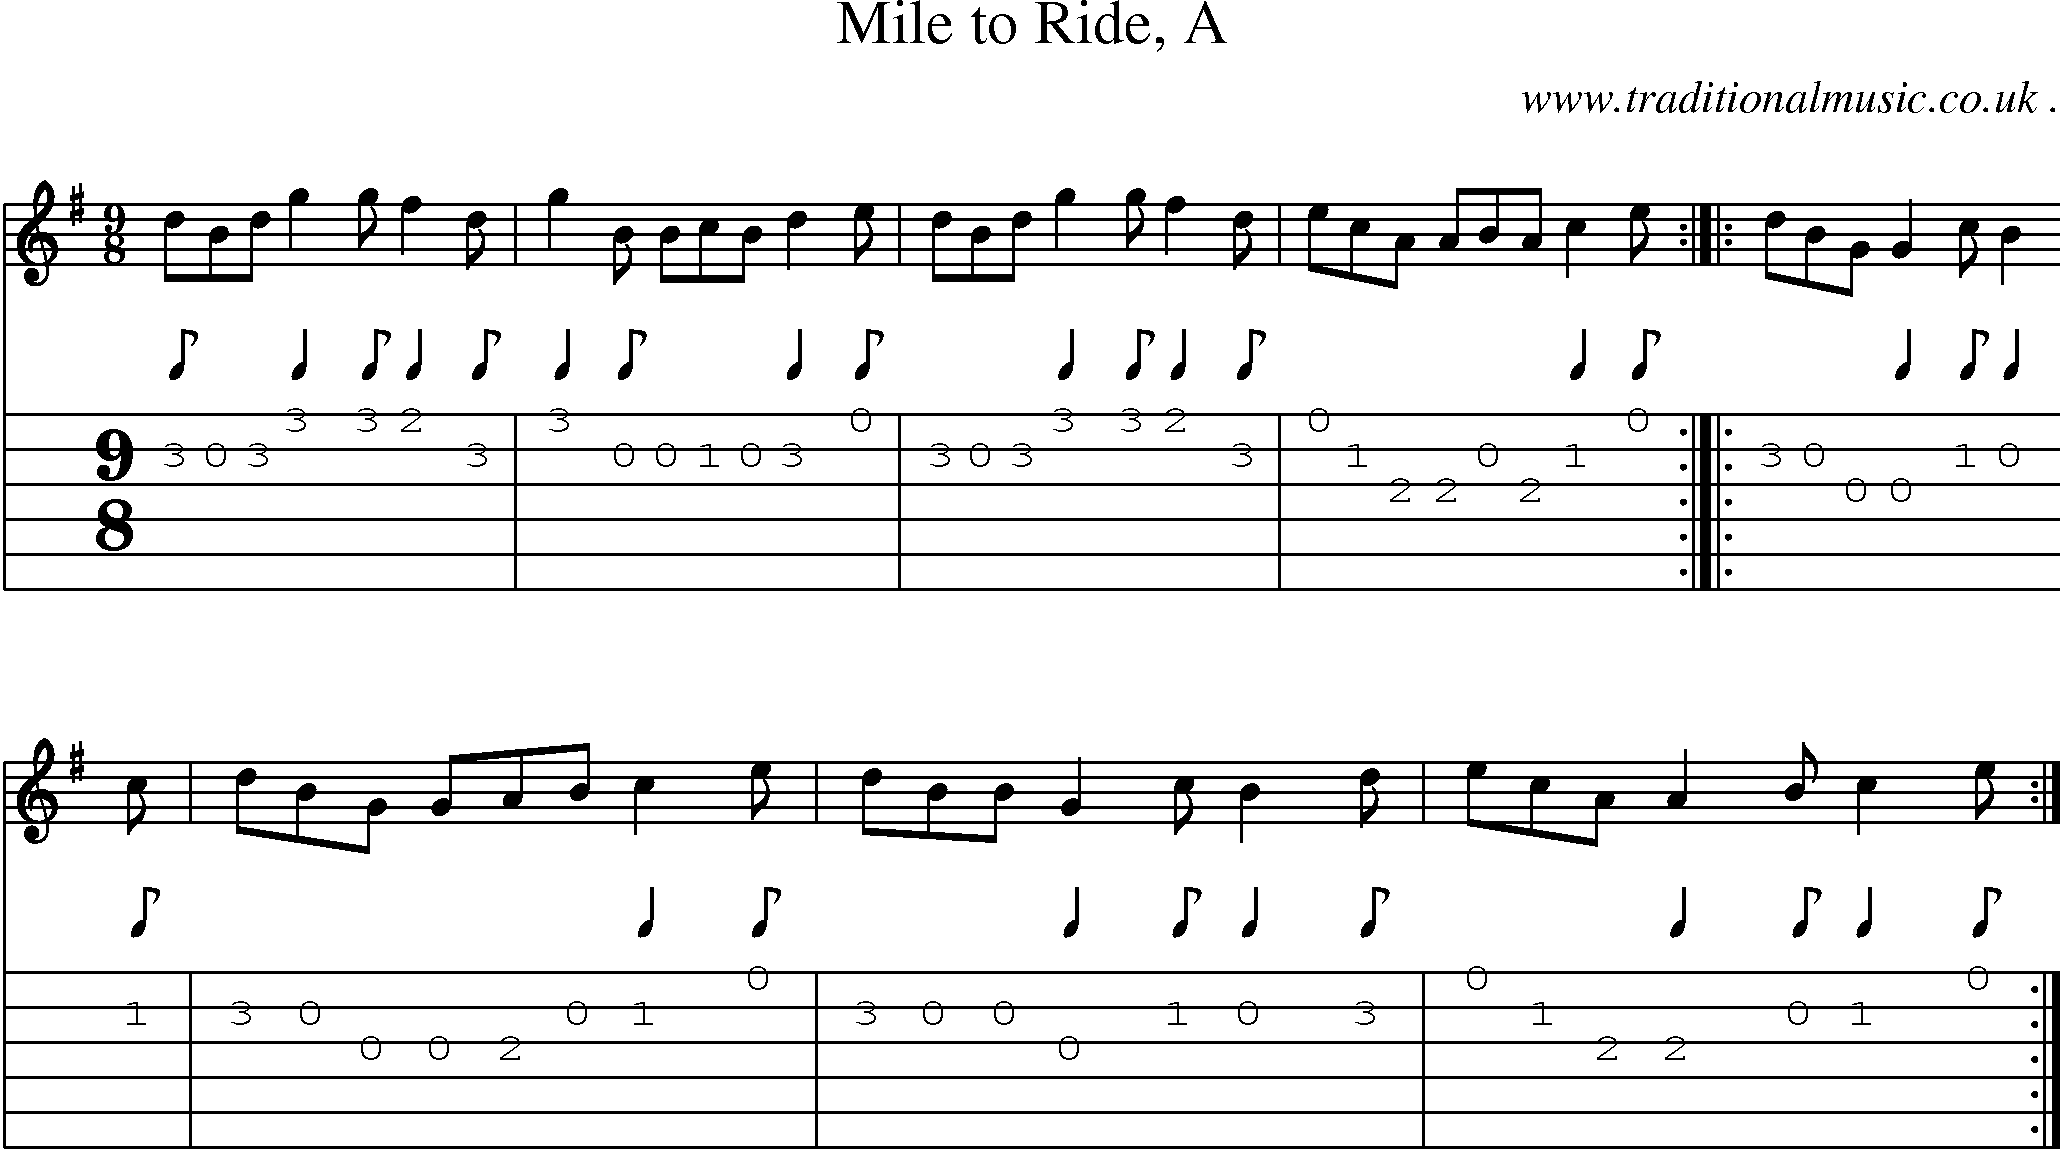 Sheet-Music and Guitar Tabs for Mile To Ride A